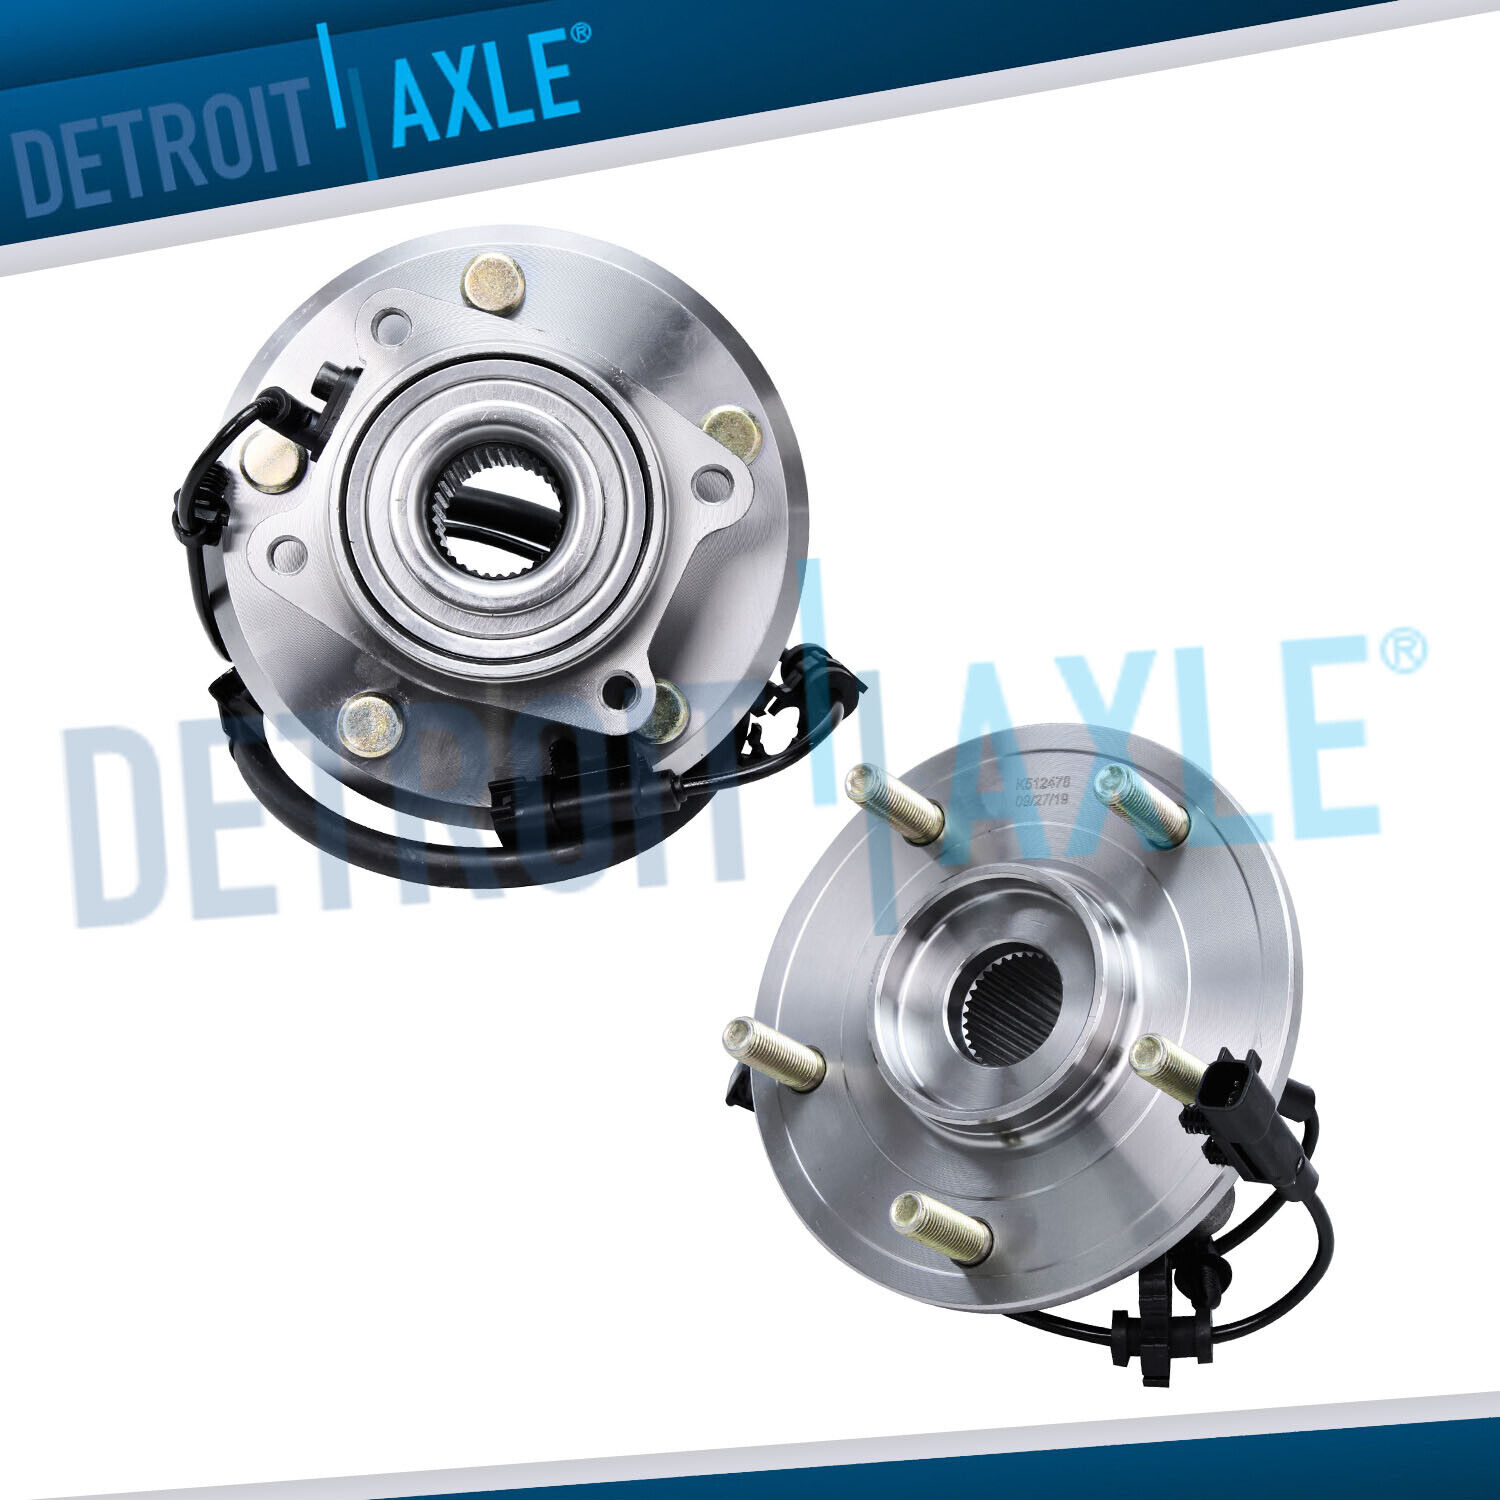 Pair (2) REAR Wheel Hub and Bearings Assembly for 2009 2010 - 2018 Dodge Journey